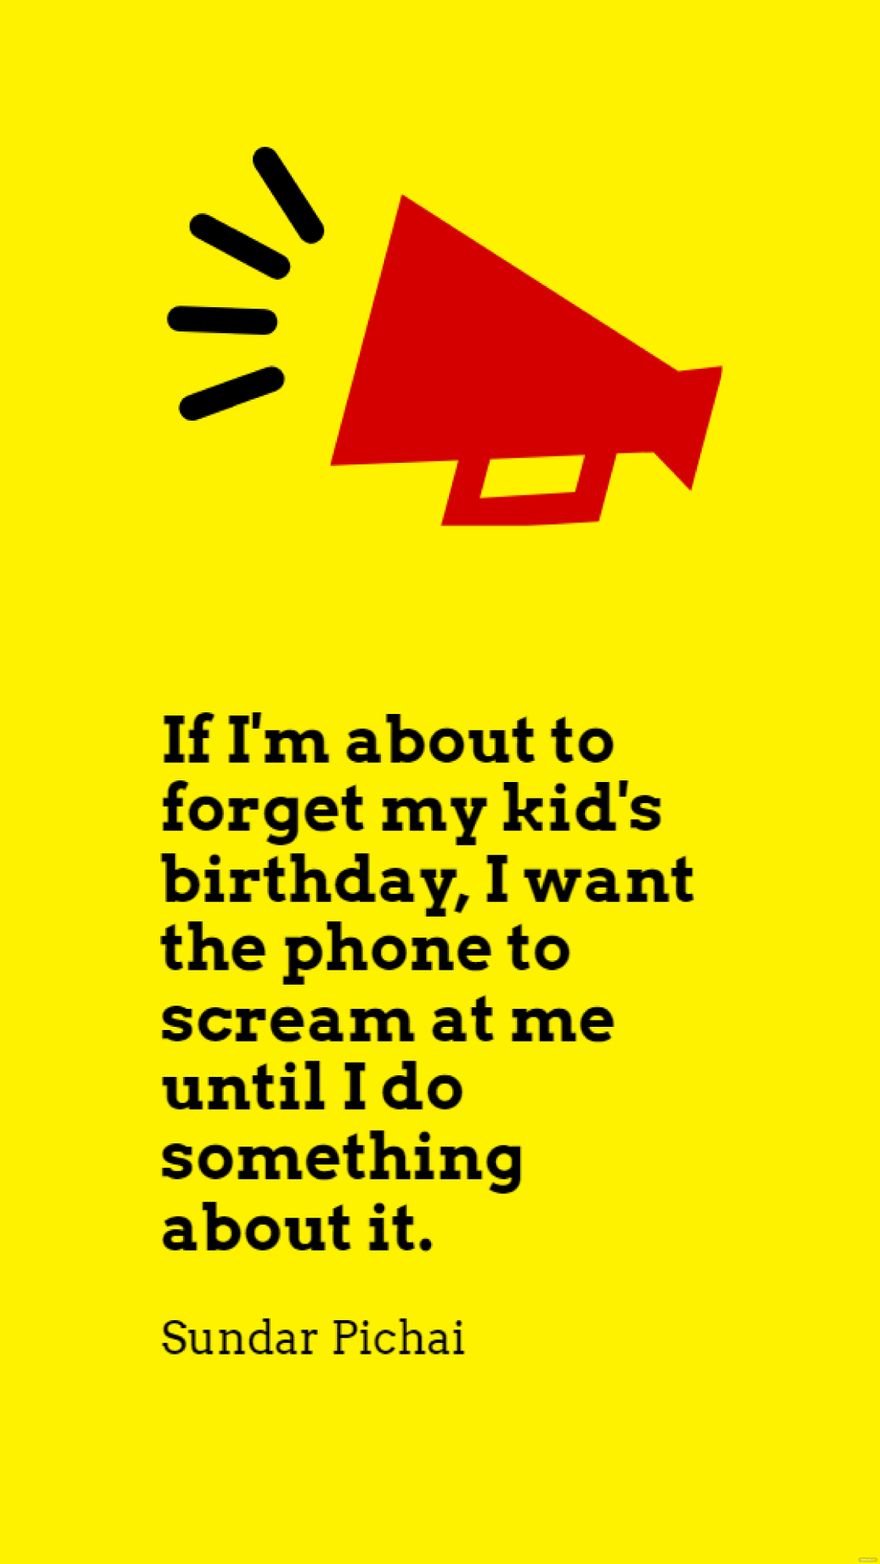 Free Sundar Pichai - If I'm about to forget my kid's birthday, I want the phone to scream at me until I do something about it. in JPG